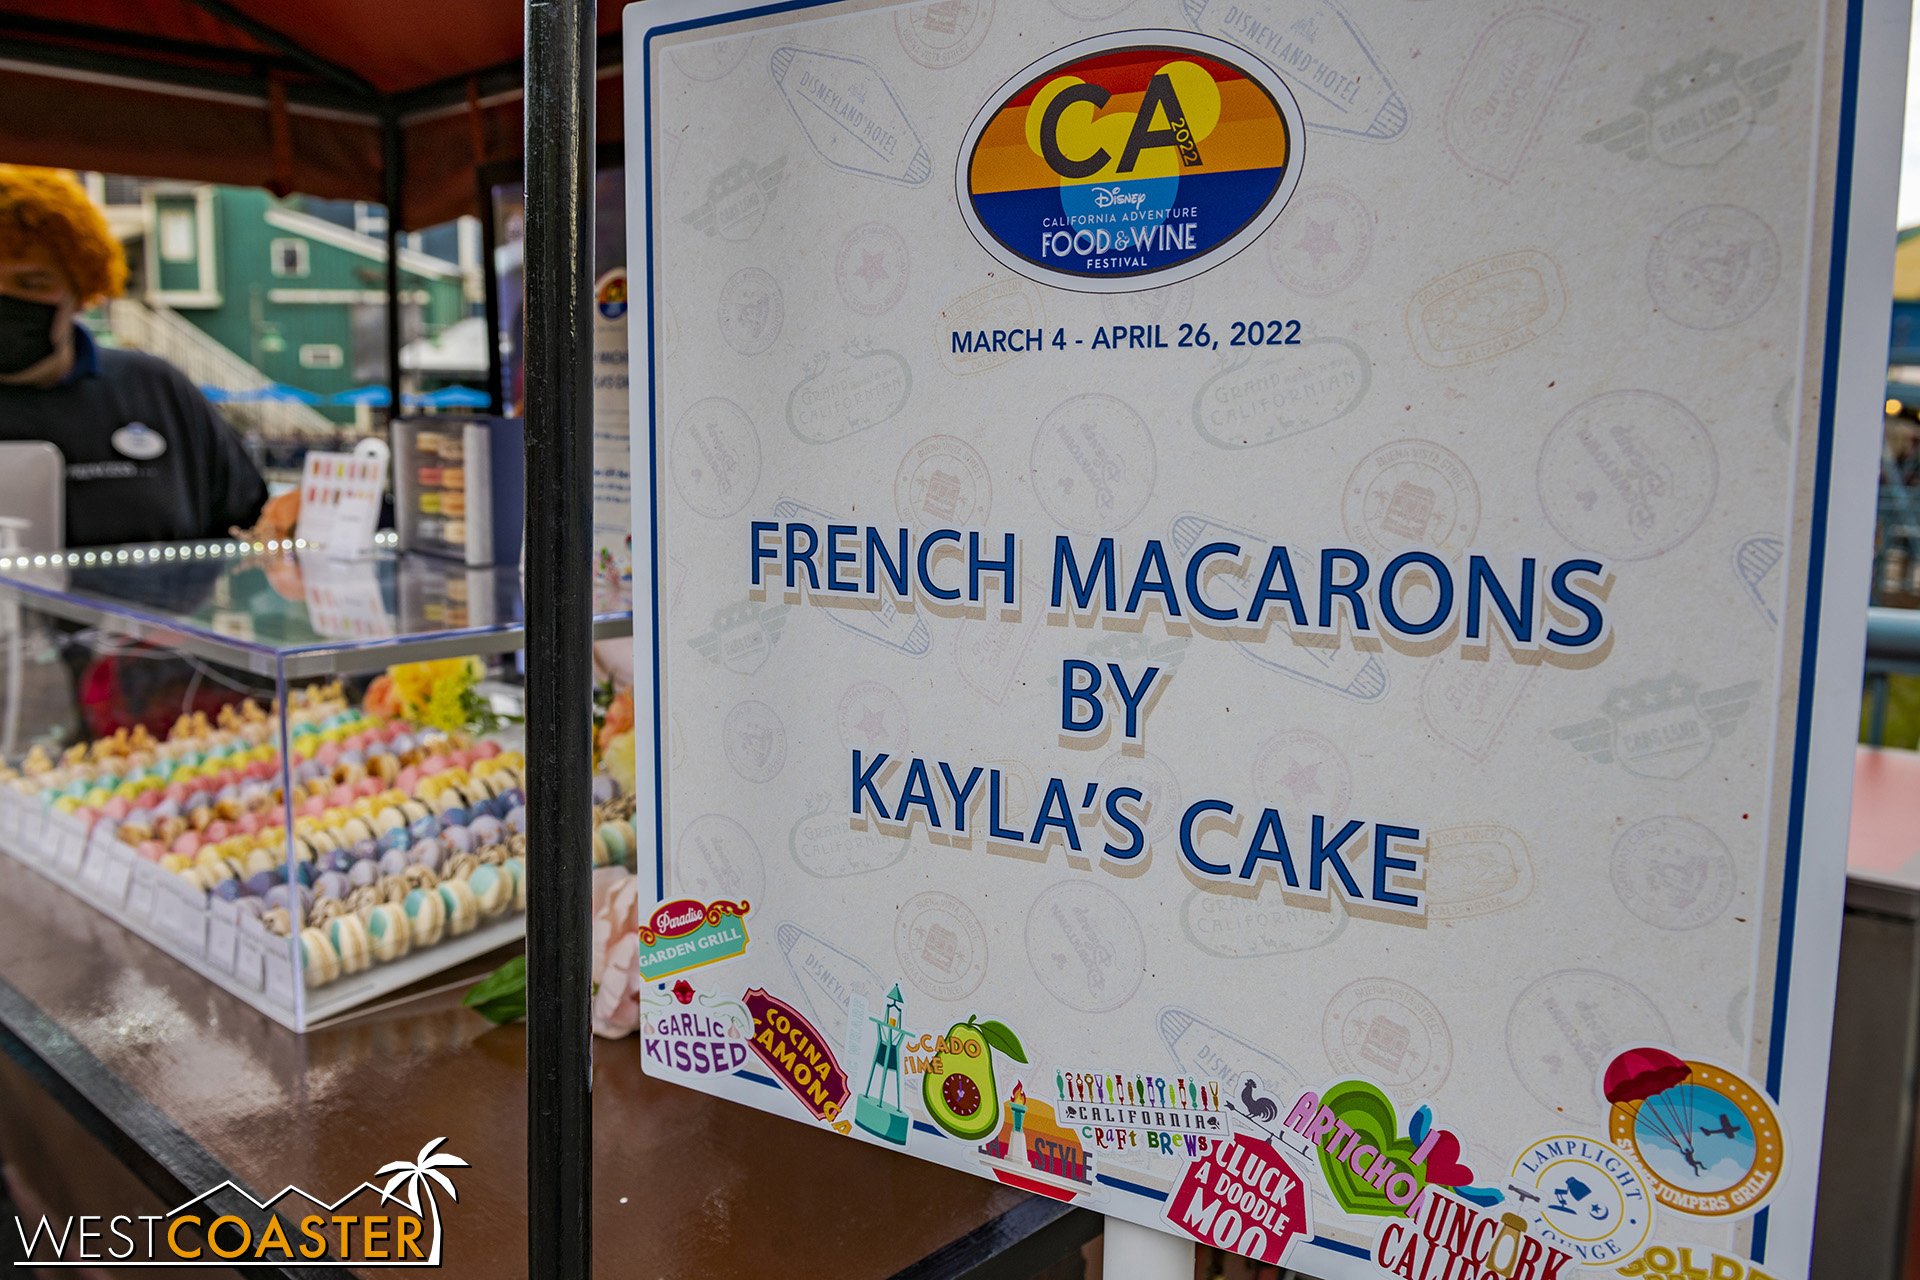  Third party merchants, like perennial Disney festival attendee, Kayla’s Cake, are also featured. 